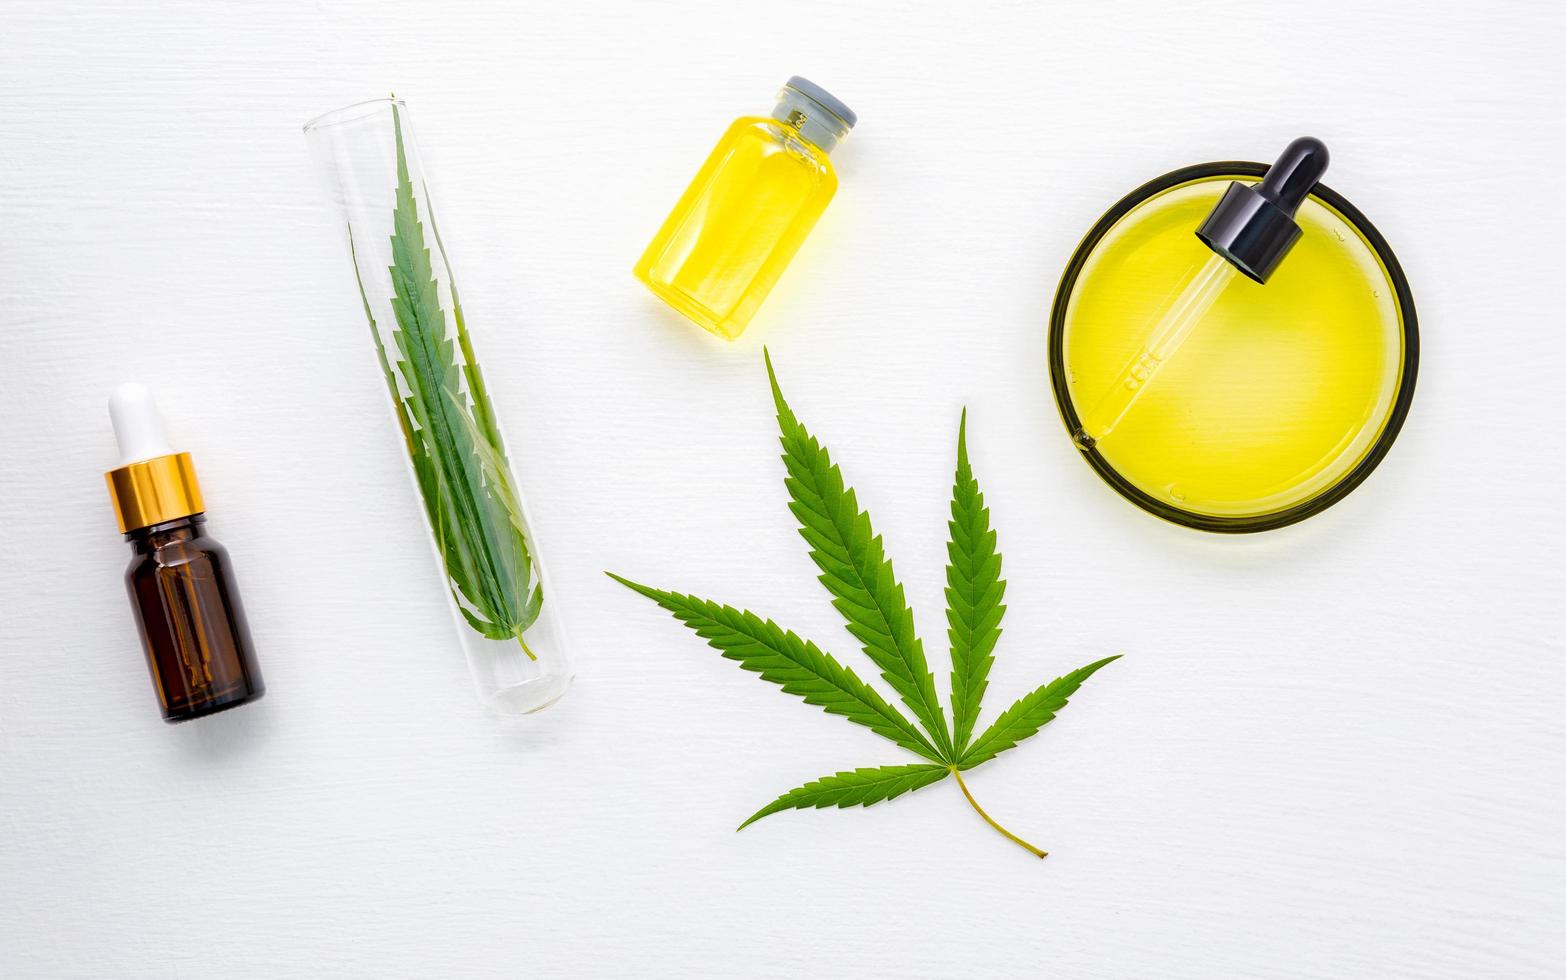 Glass bottle of cannabis oil and hemp leaves set up on white background photo